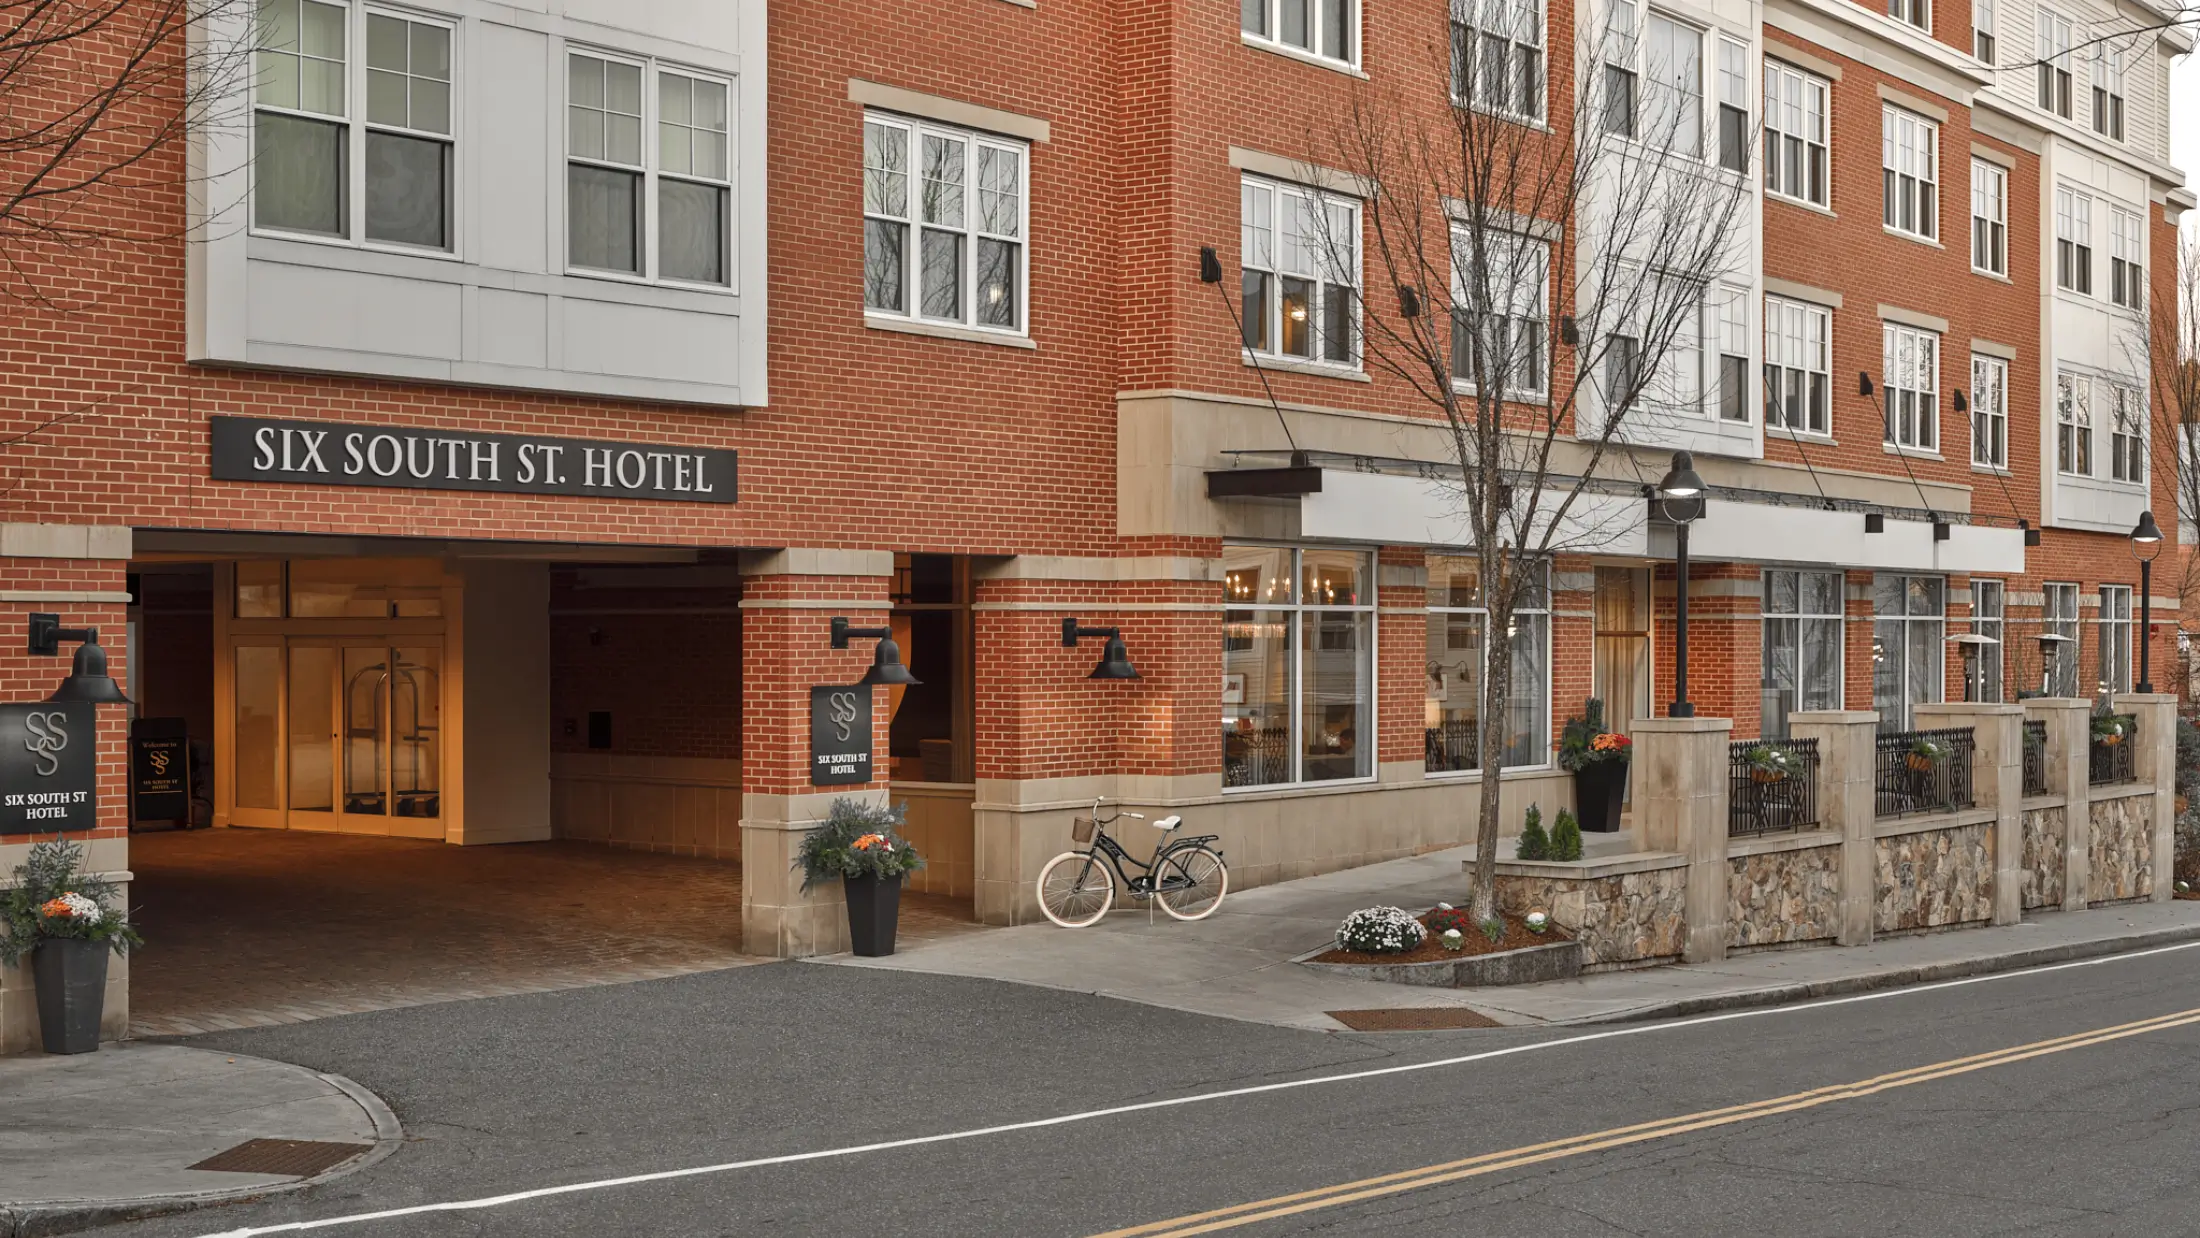 Visitor’s bicycle leans along front entryway of Six South St Hotel in Hanover, New Hampshire.